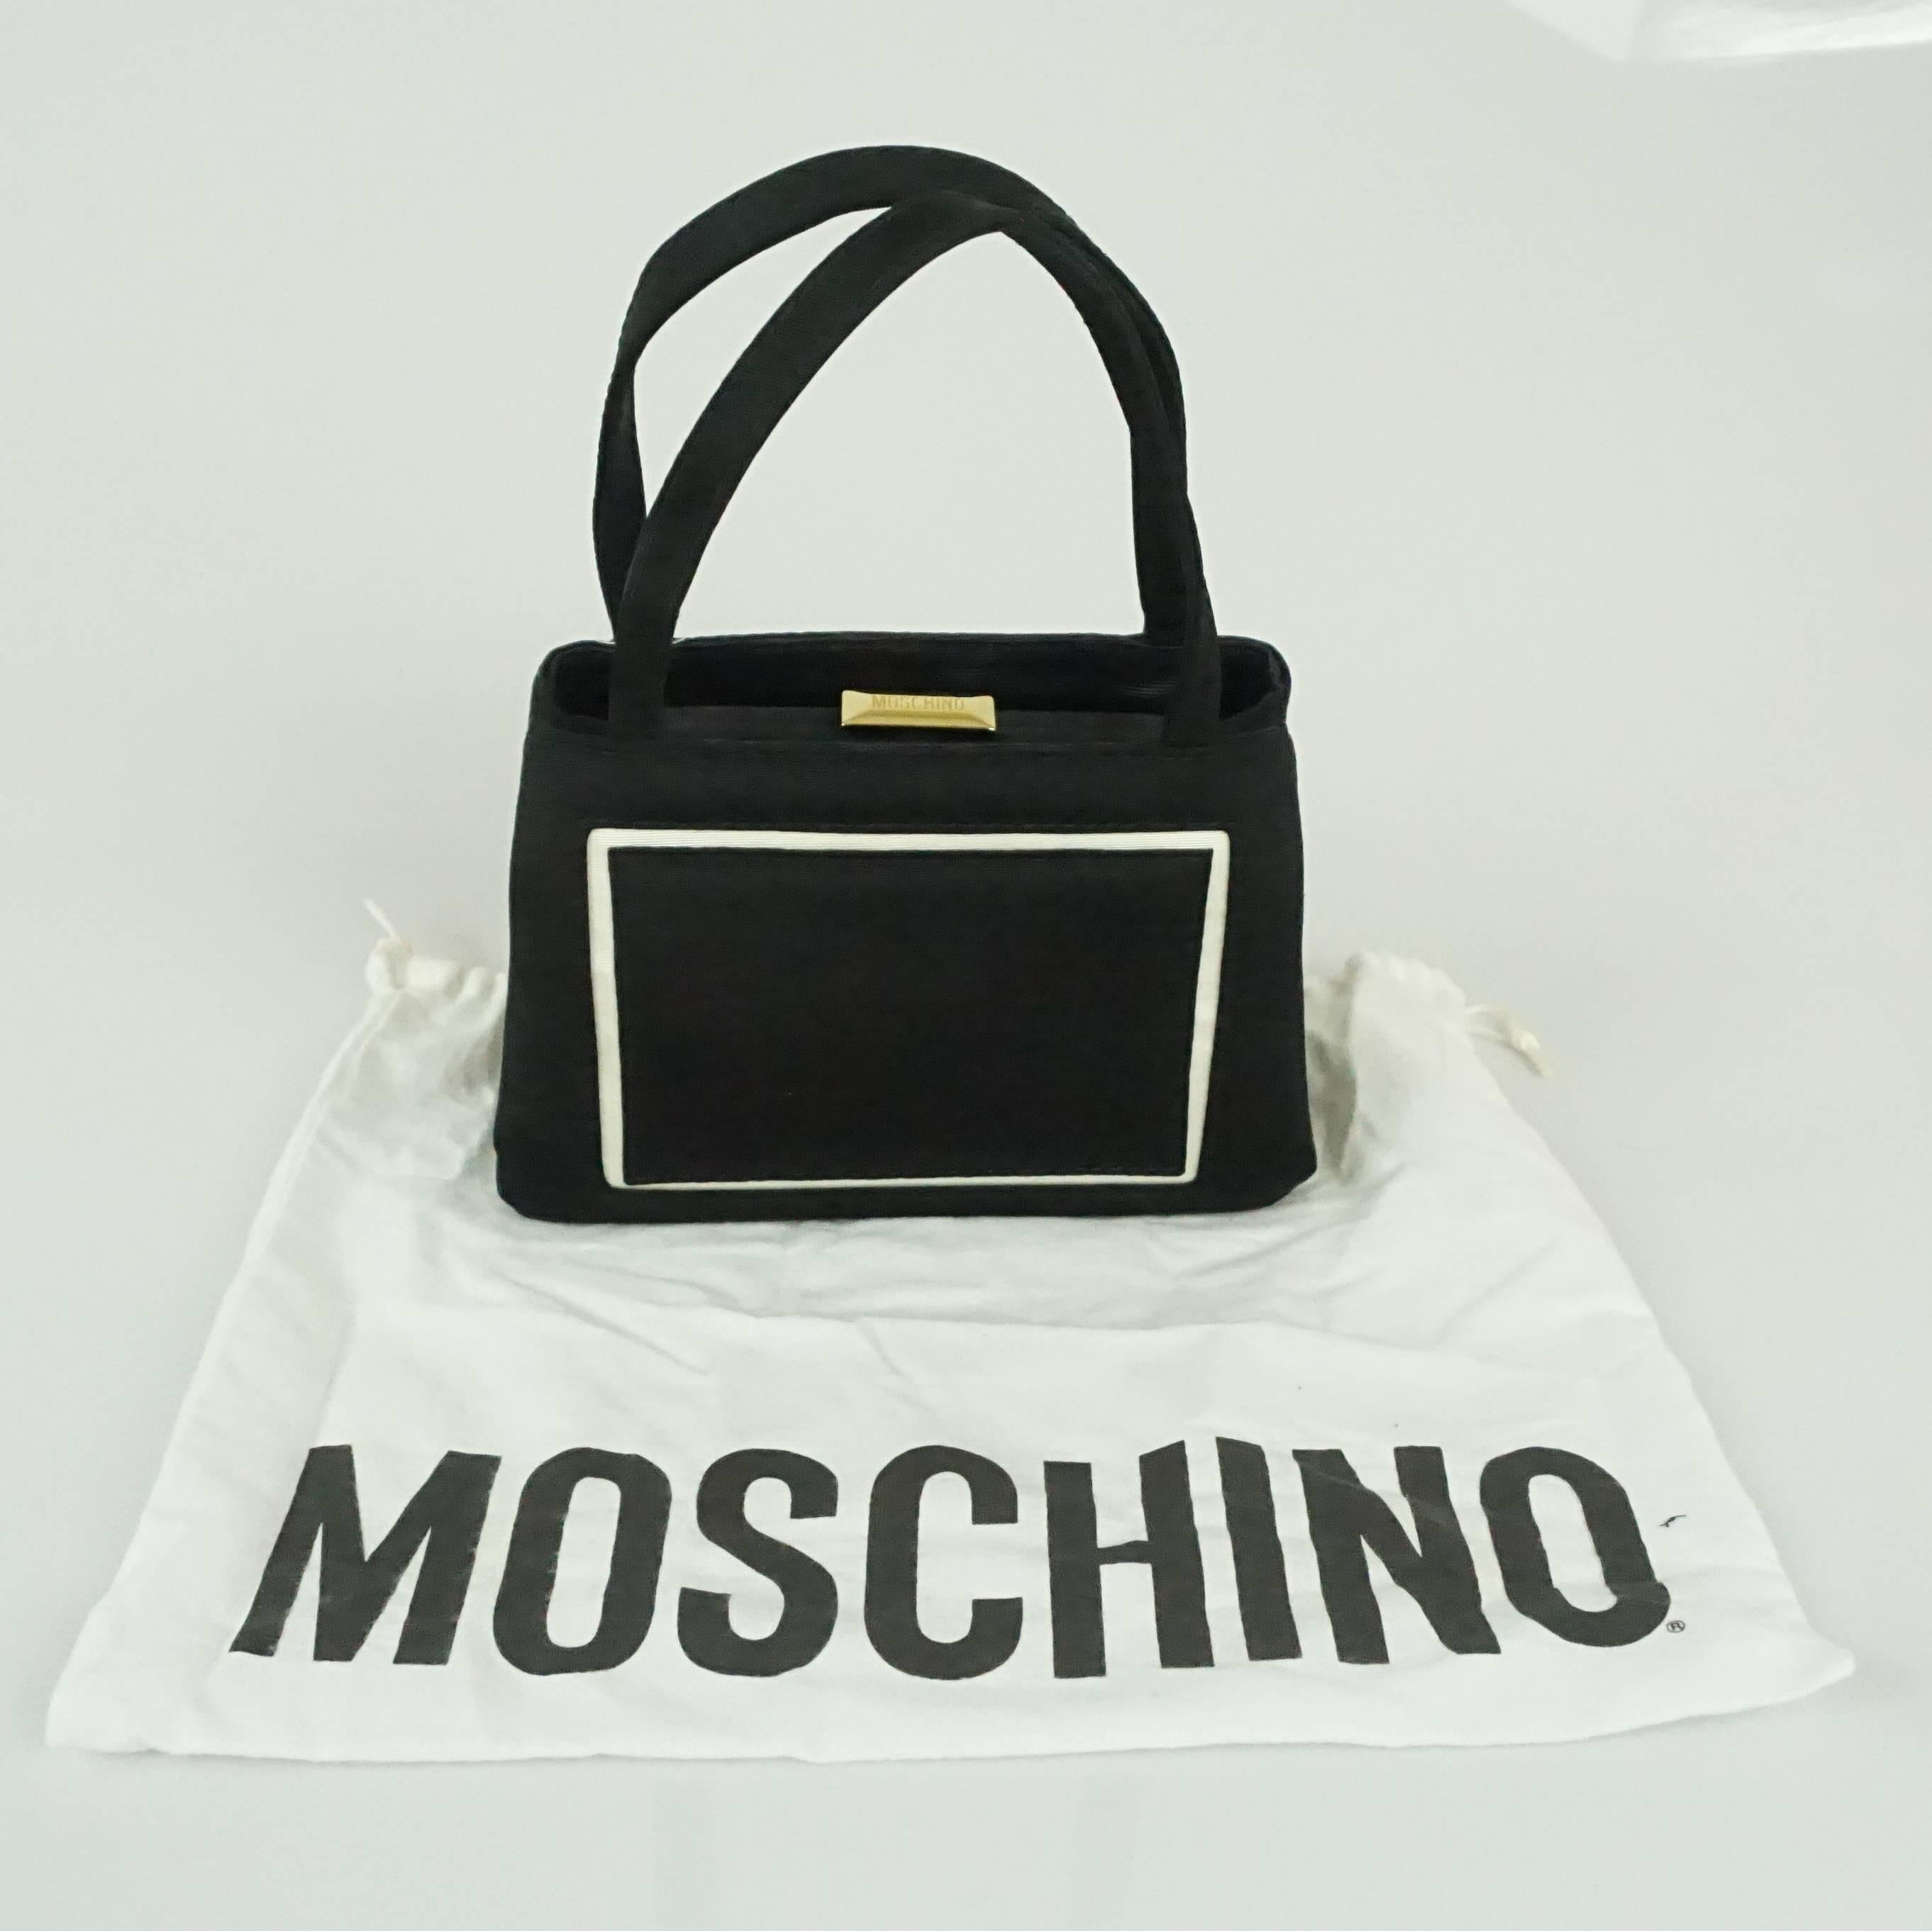 Moschino Black Bag with White Trim and Grosgrain Handle  2